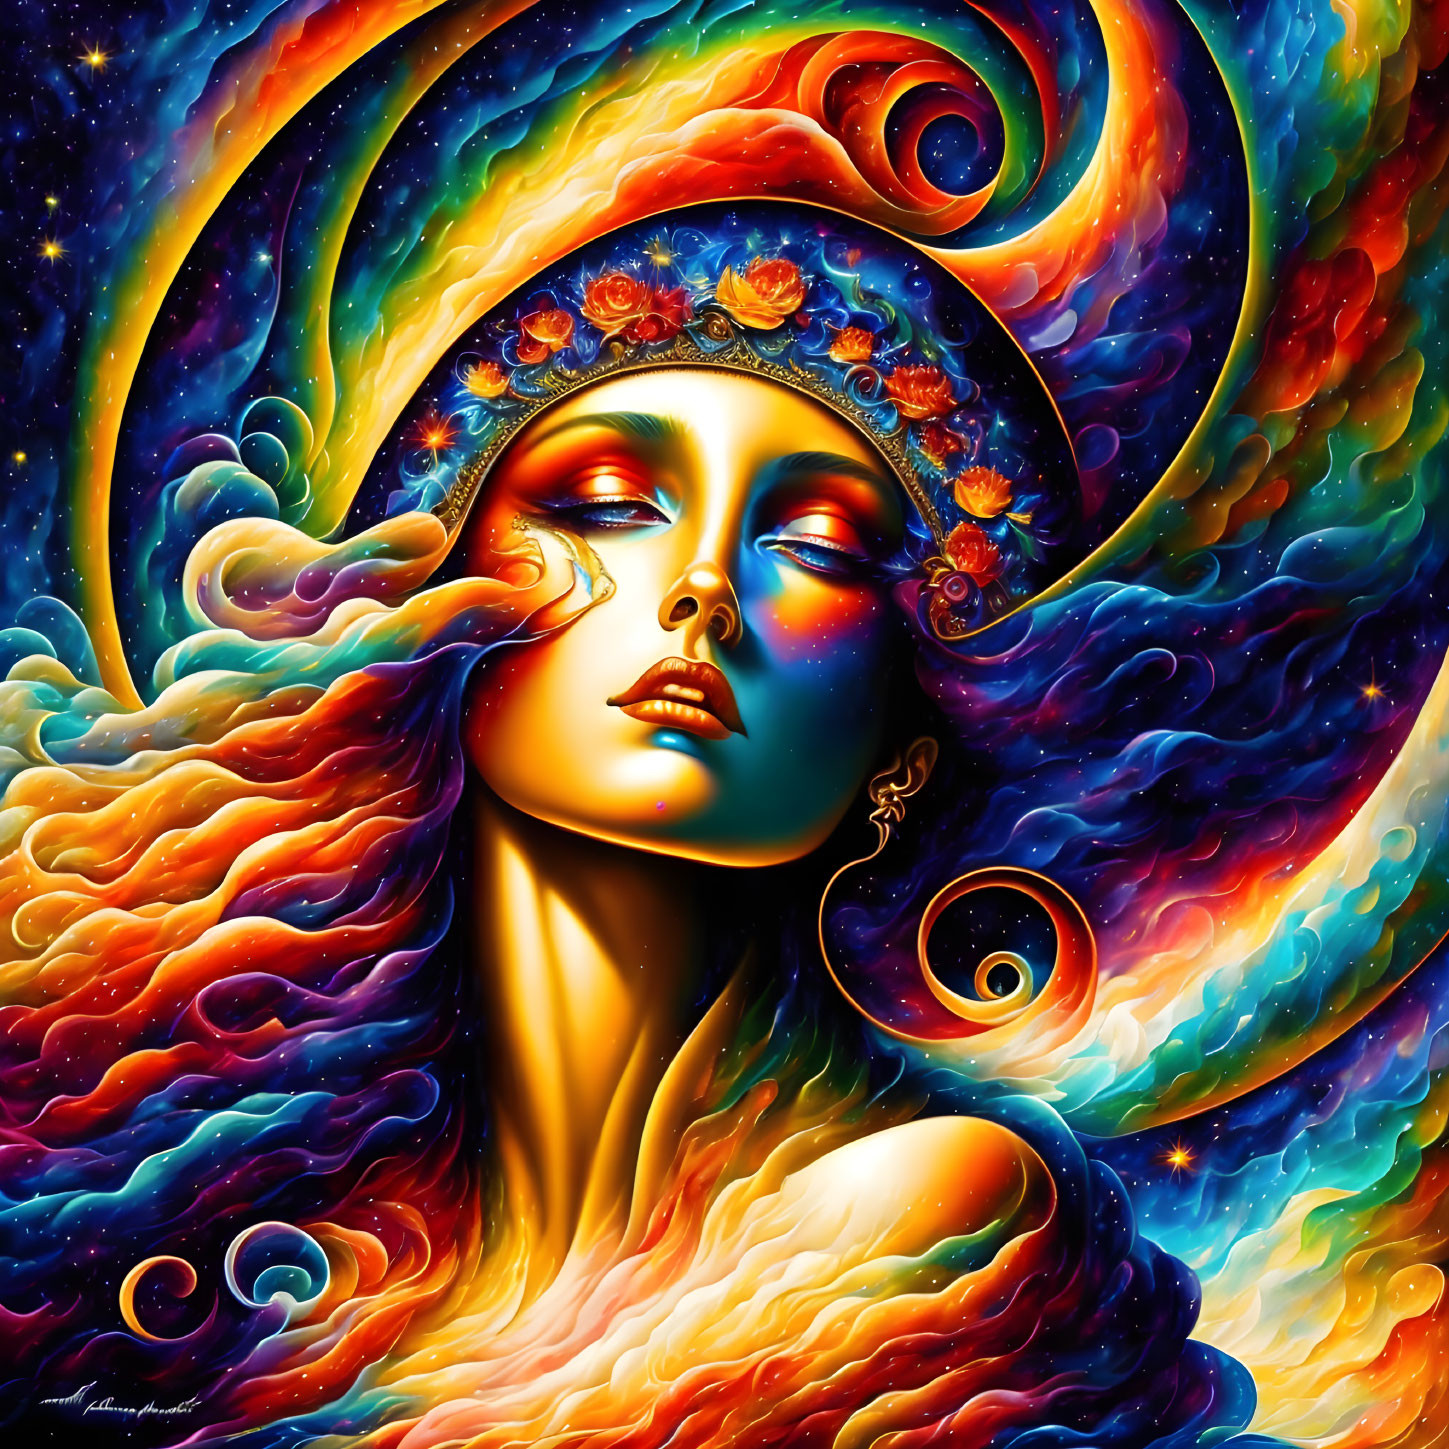 Cosmic-themed artwork featuring a woman with swirling galaxy hair